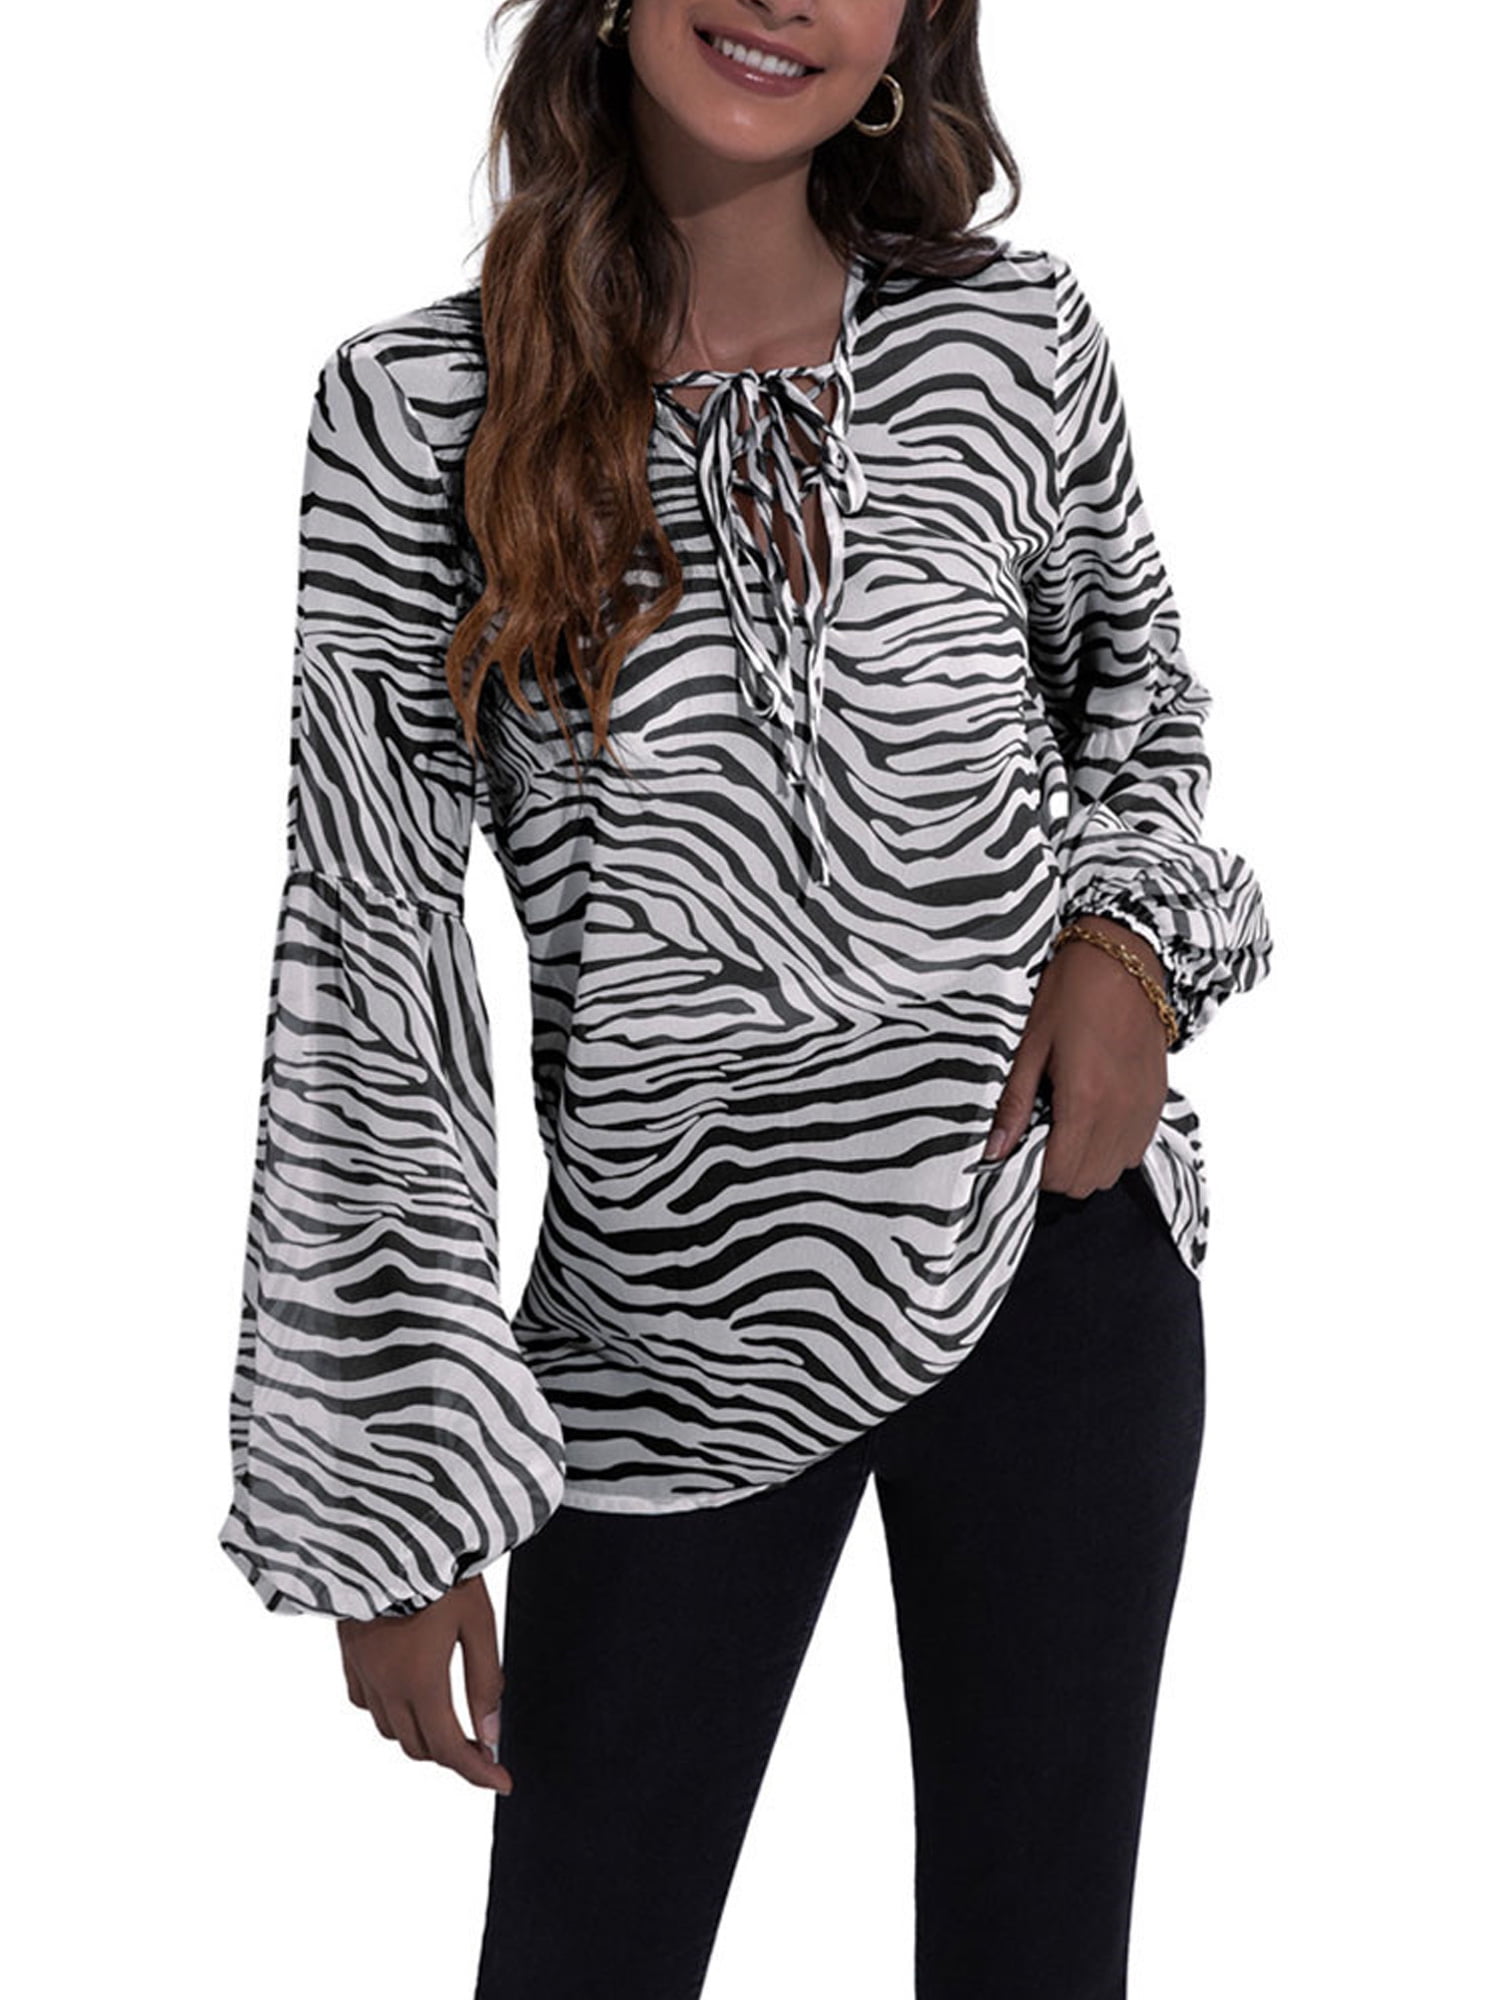 Small Navy Women Fashion Tops Zebra Patterned Cold Shoulder Sweatshirt Lantern Sleeve Pullover Ladies Casual Plus Size Shirts